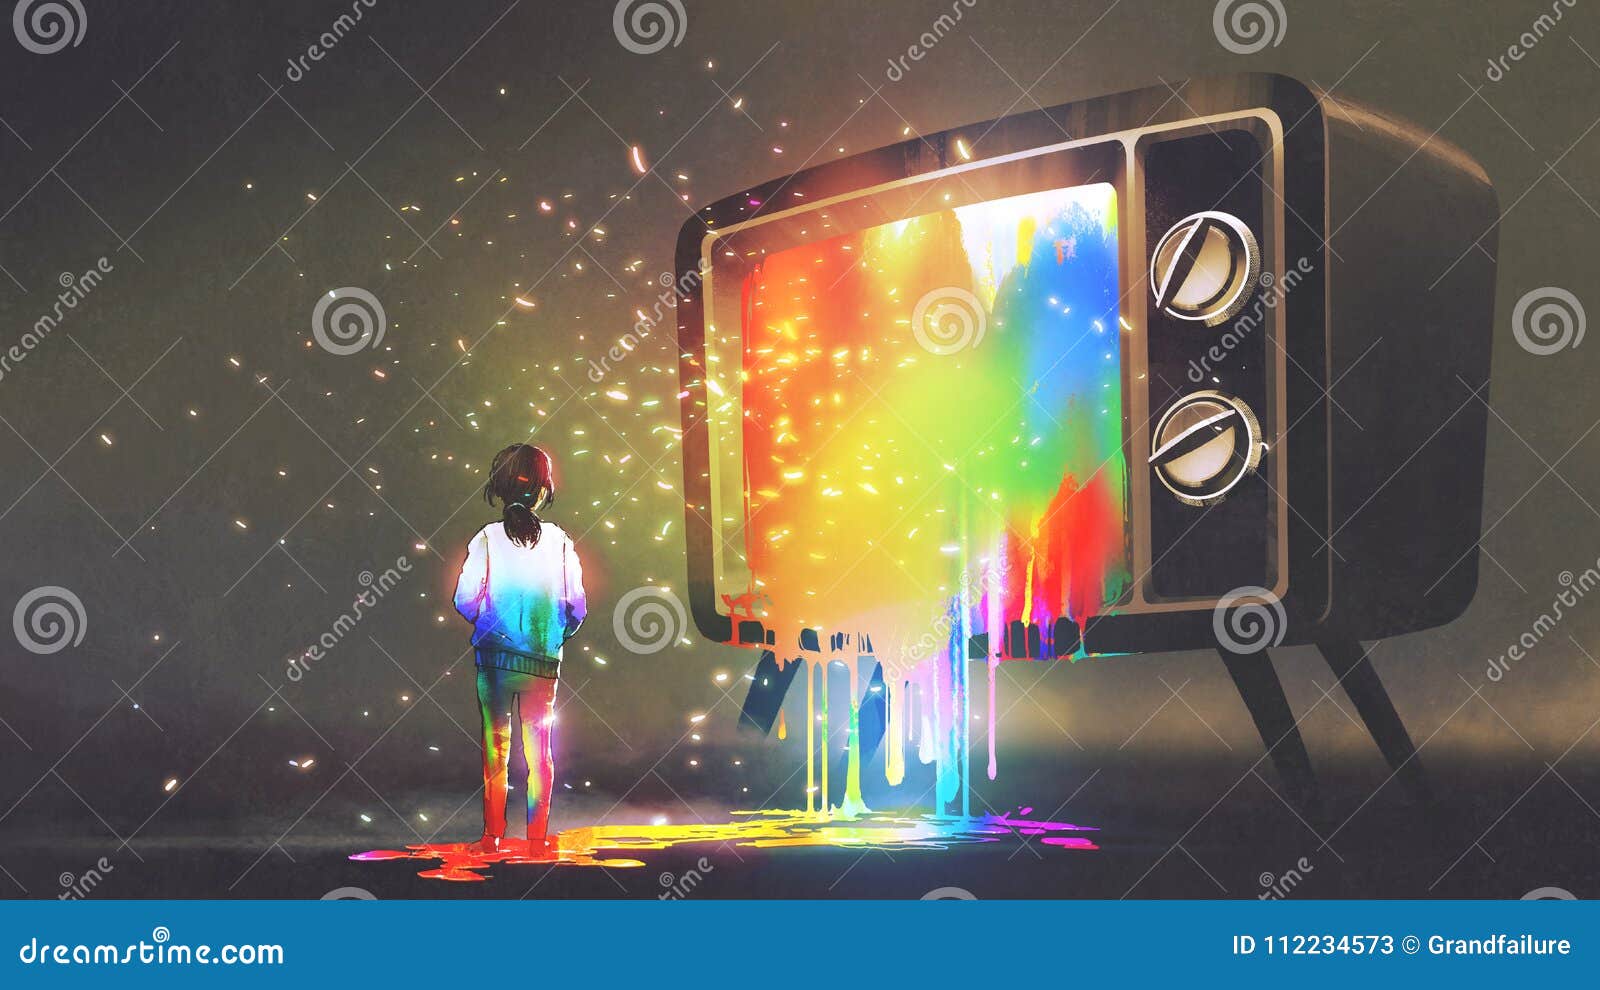 girl messed with colorful light from tv